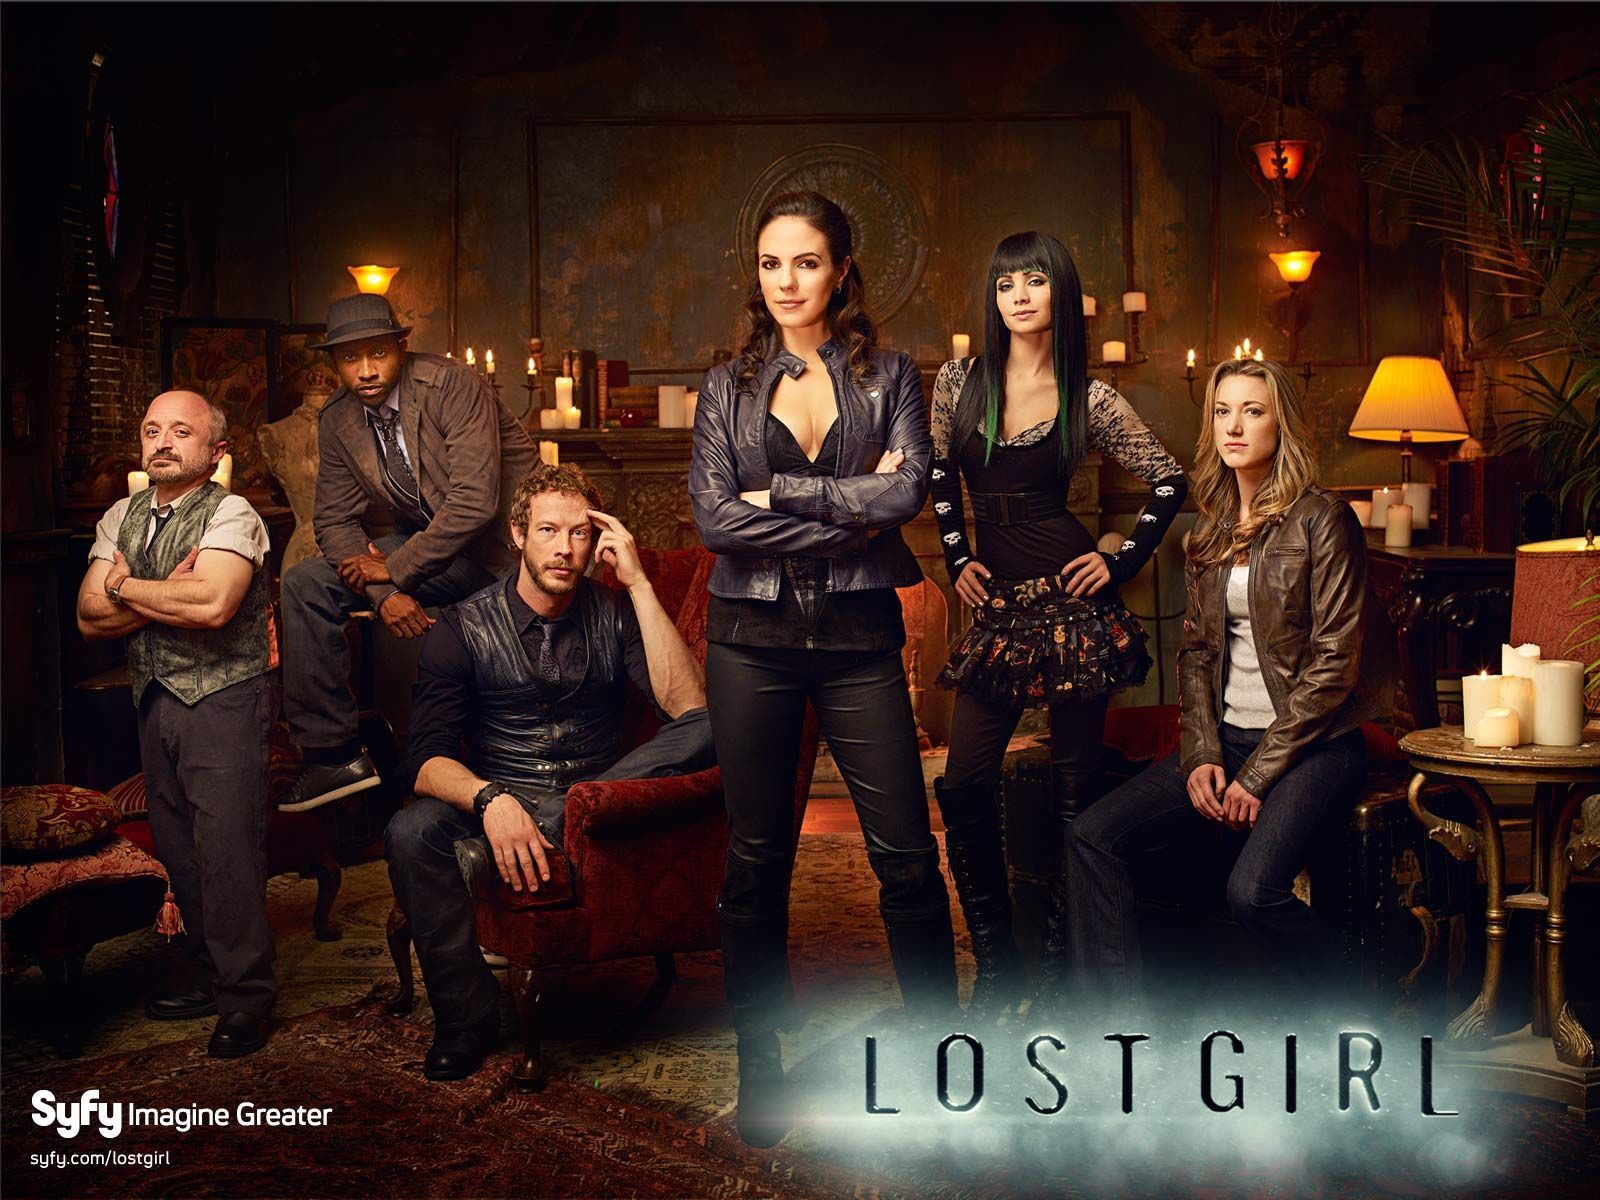 Lost Girl Wallpapers